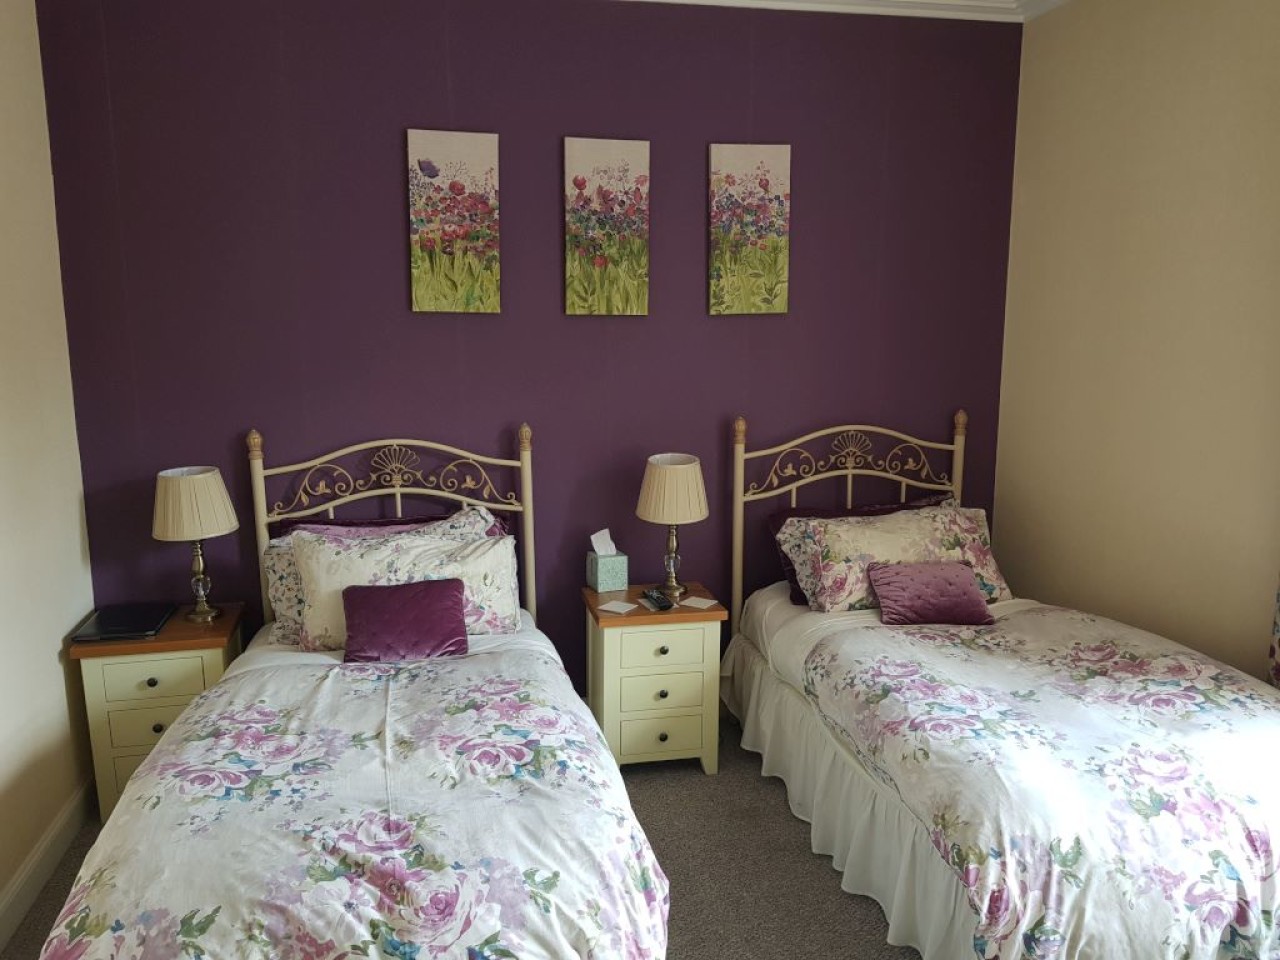 Plum room, a quiet twin room at the rear of the property has an en-suite shower room, toiletries, hairdryer, tv and hospitality tray including homemade shortbread